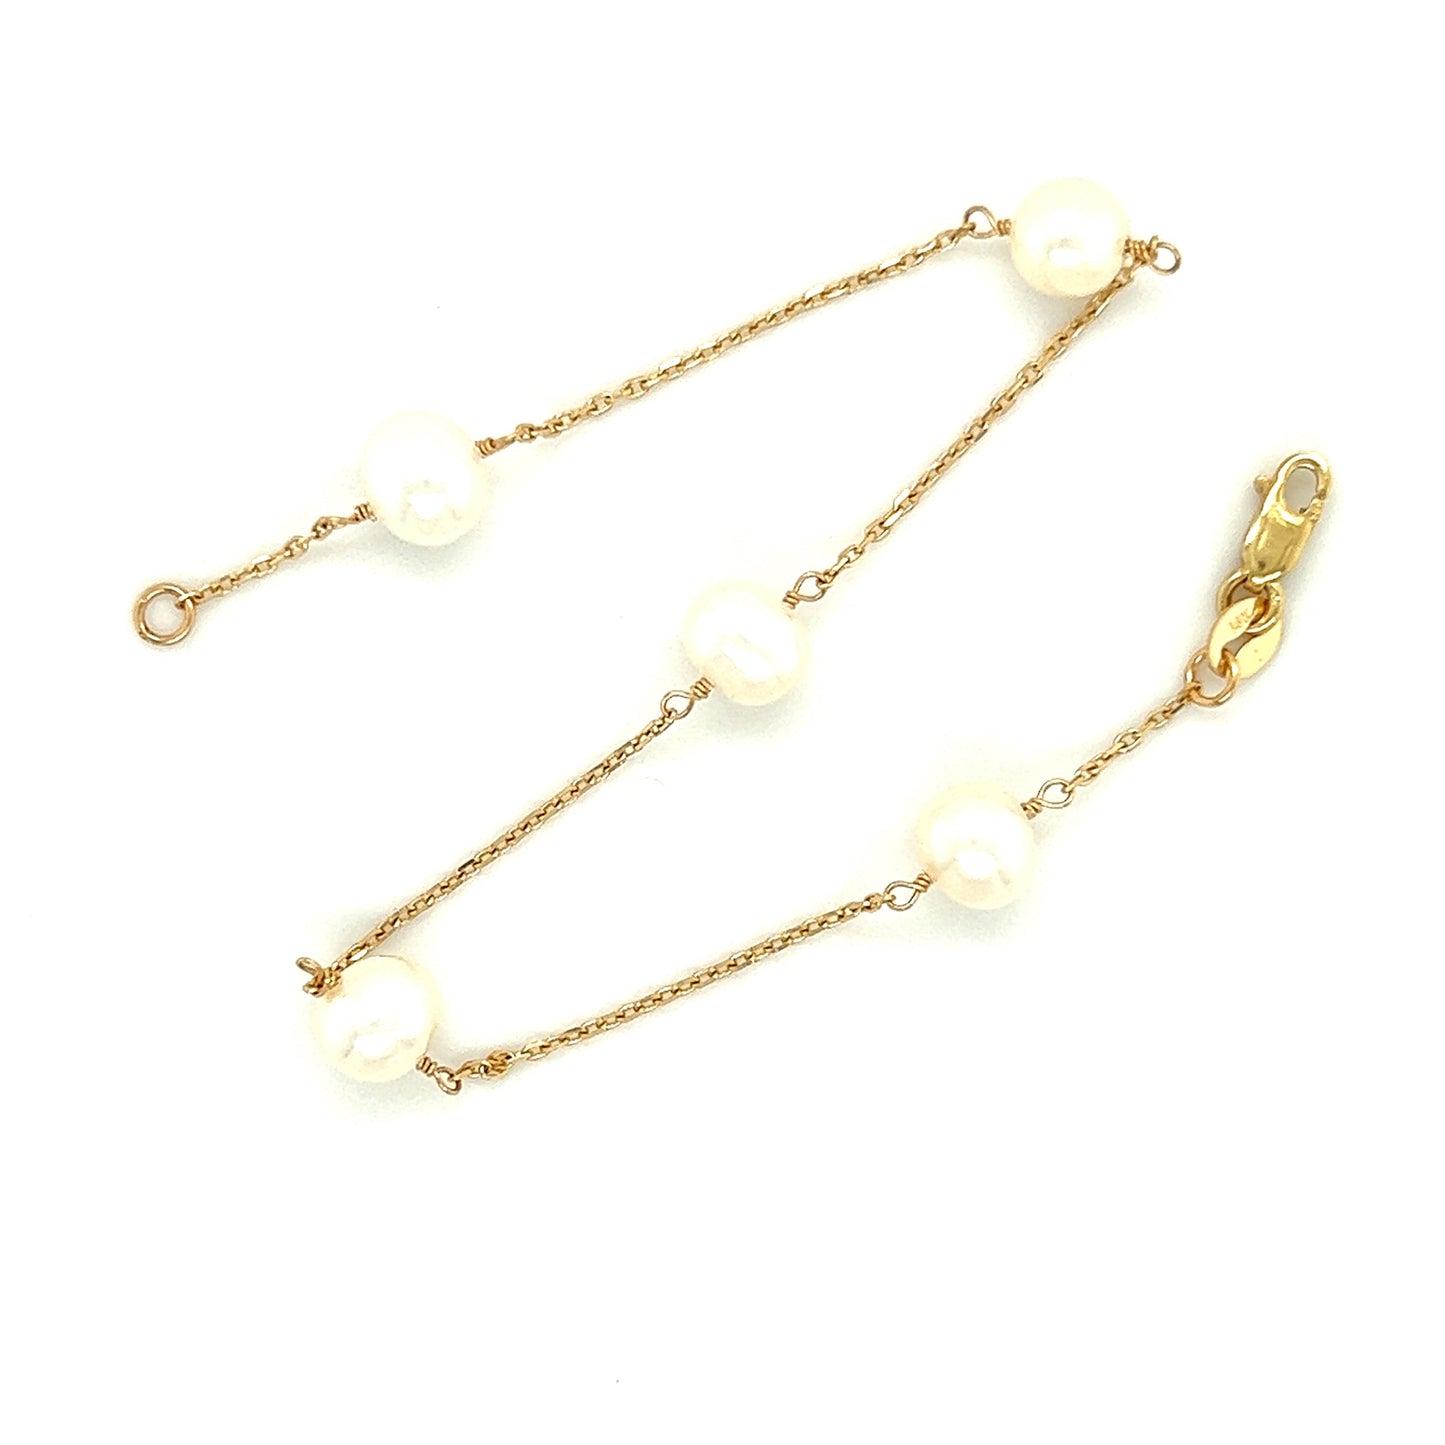 Freshwater Pearl Station Bracelet with Five Pearls in 14K Yellow Gold Alternative View